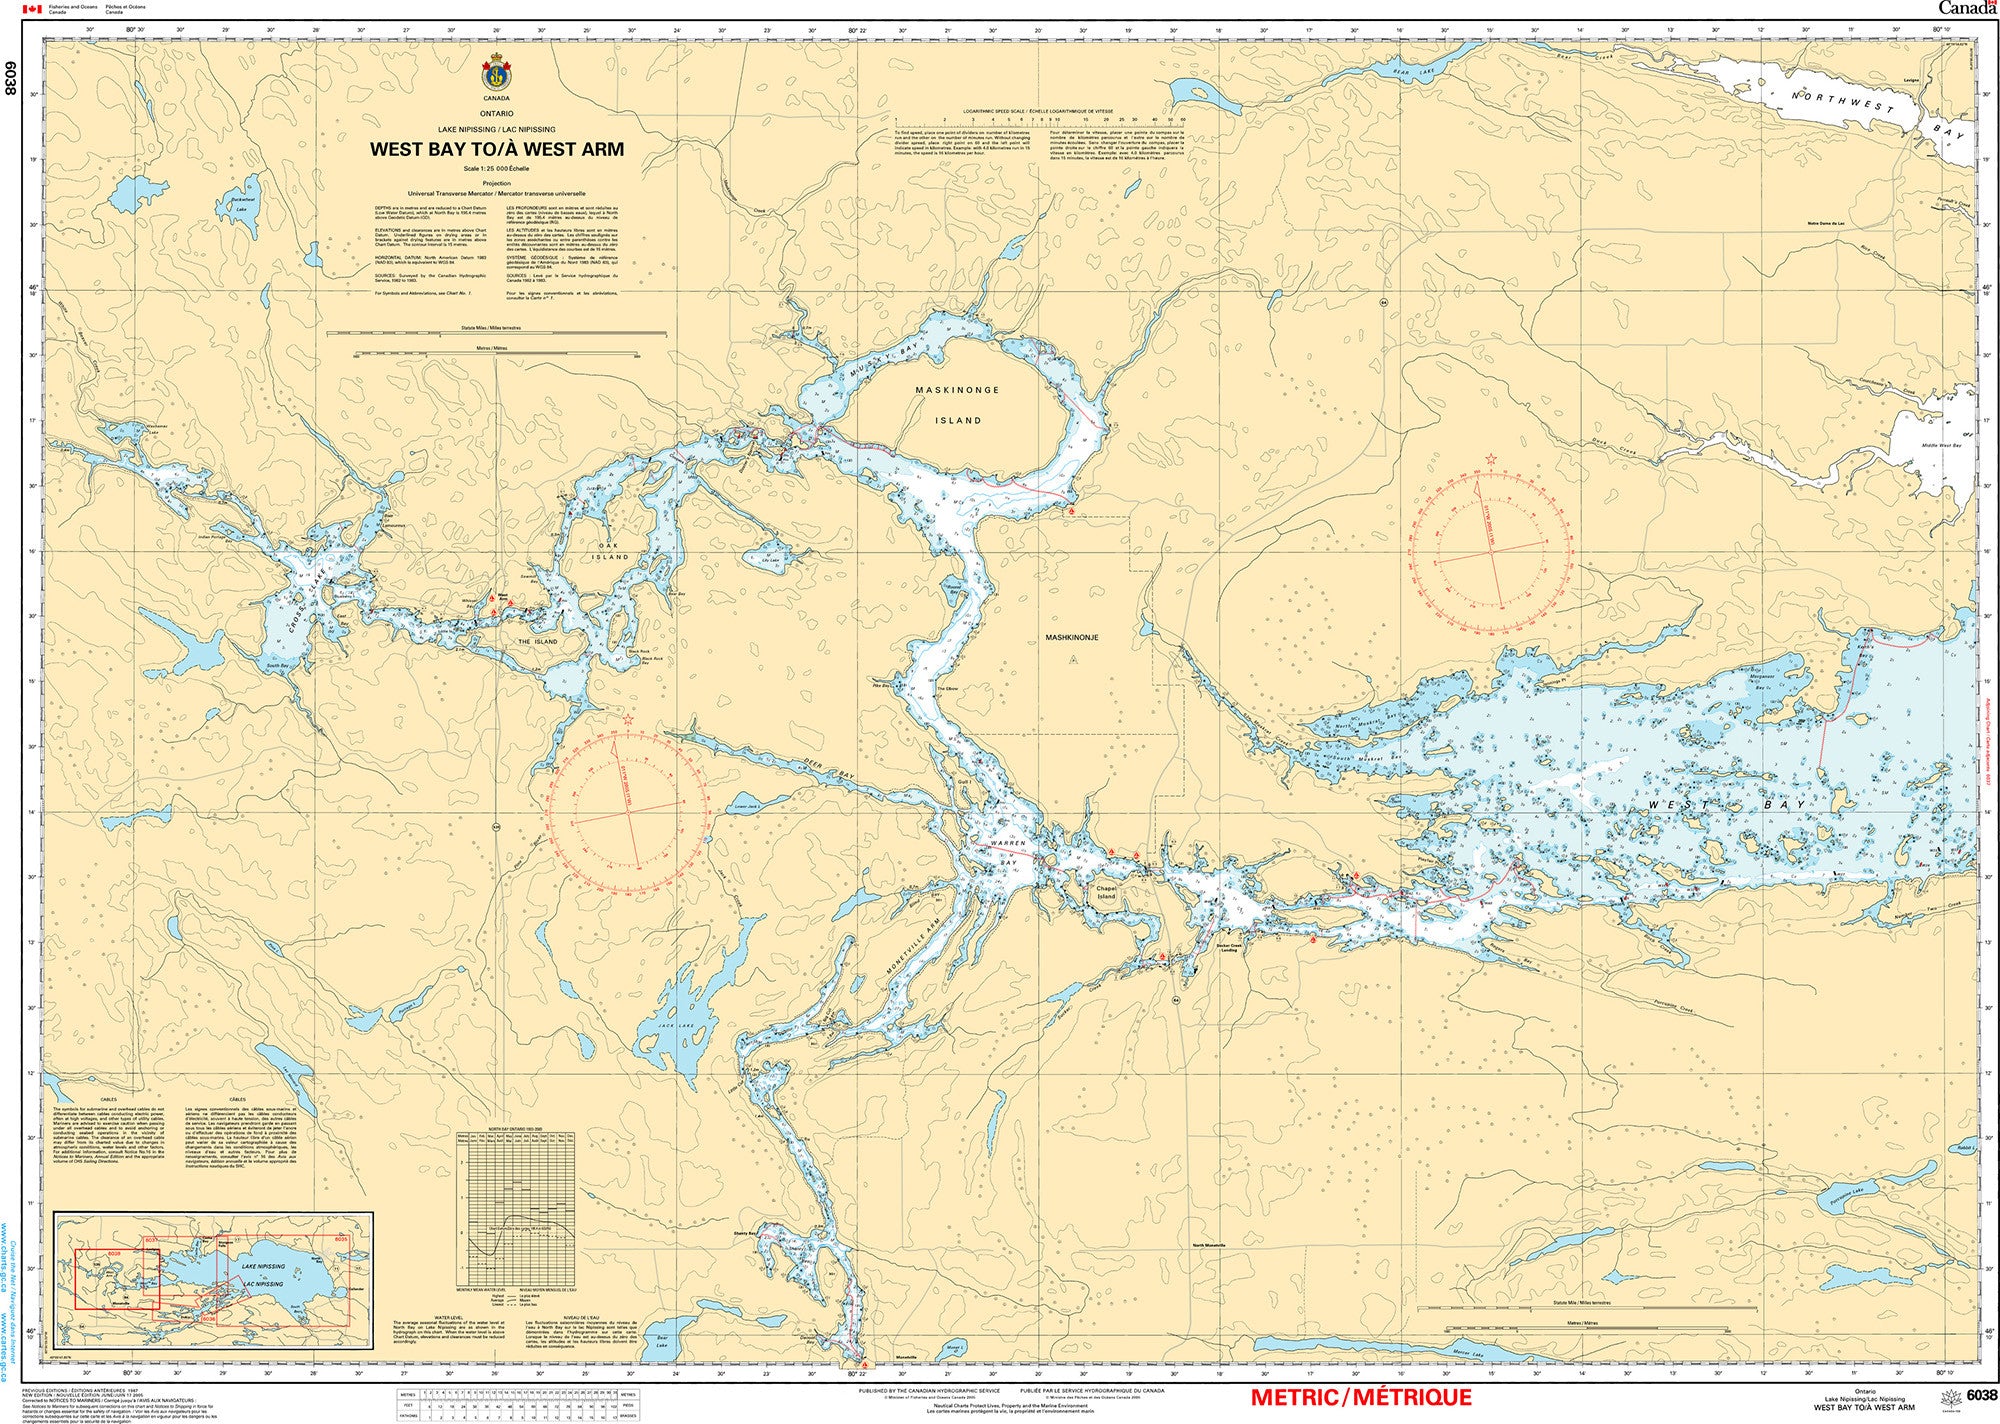 Canadian Hydrographic Service Nautical Chart CHS6038: West Bay to/à West Arm